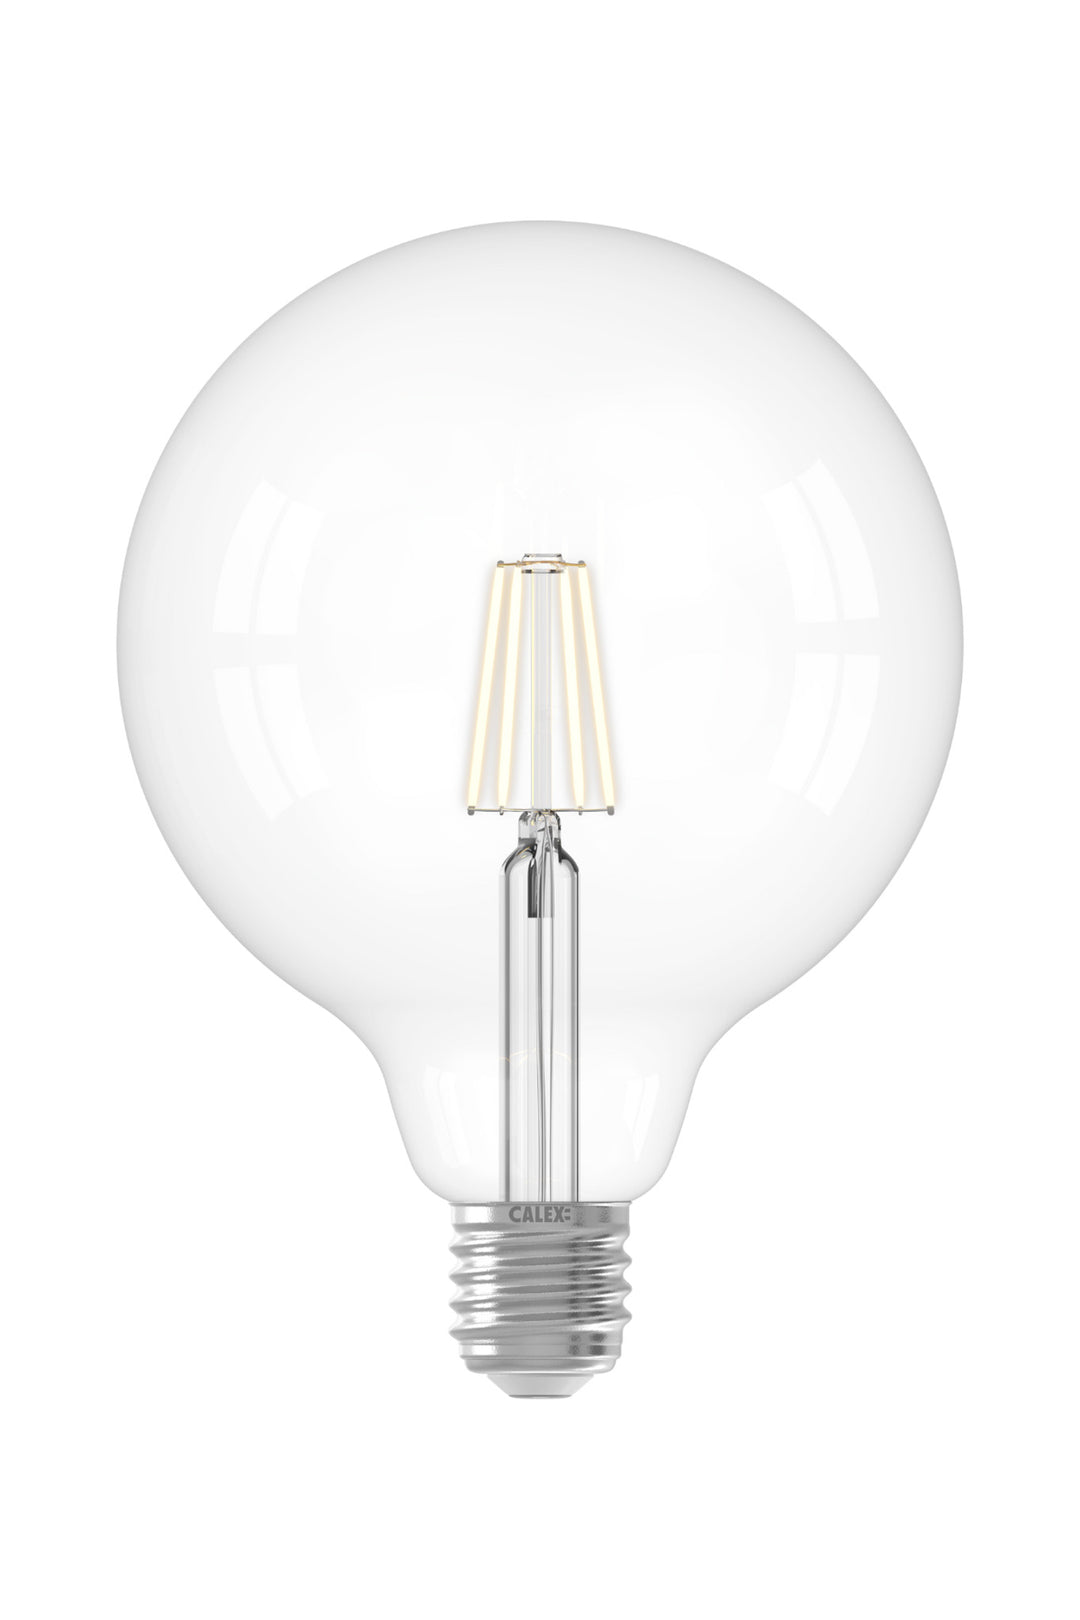 Calex Globe G125 Clear Straight Filament, E27, Dimmable with LED Dimmer 1101009800